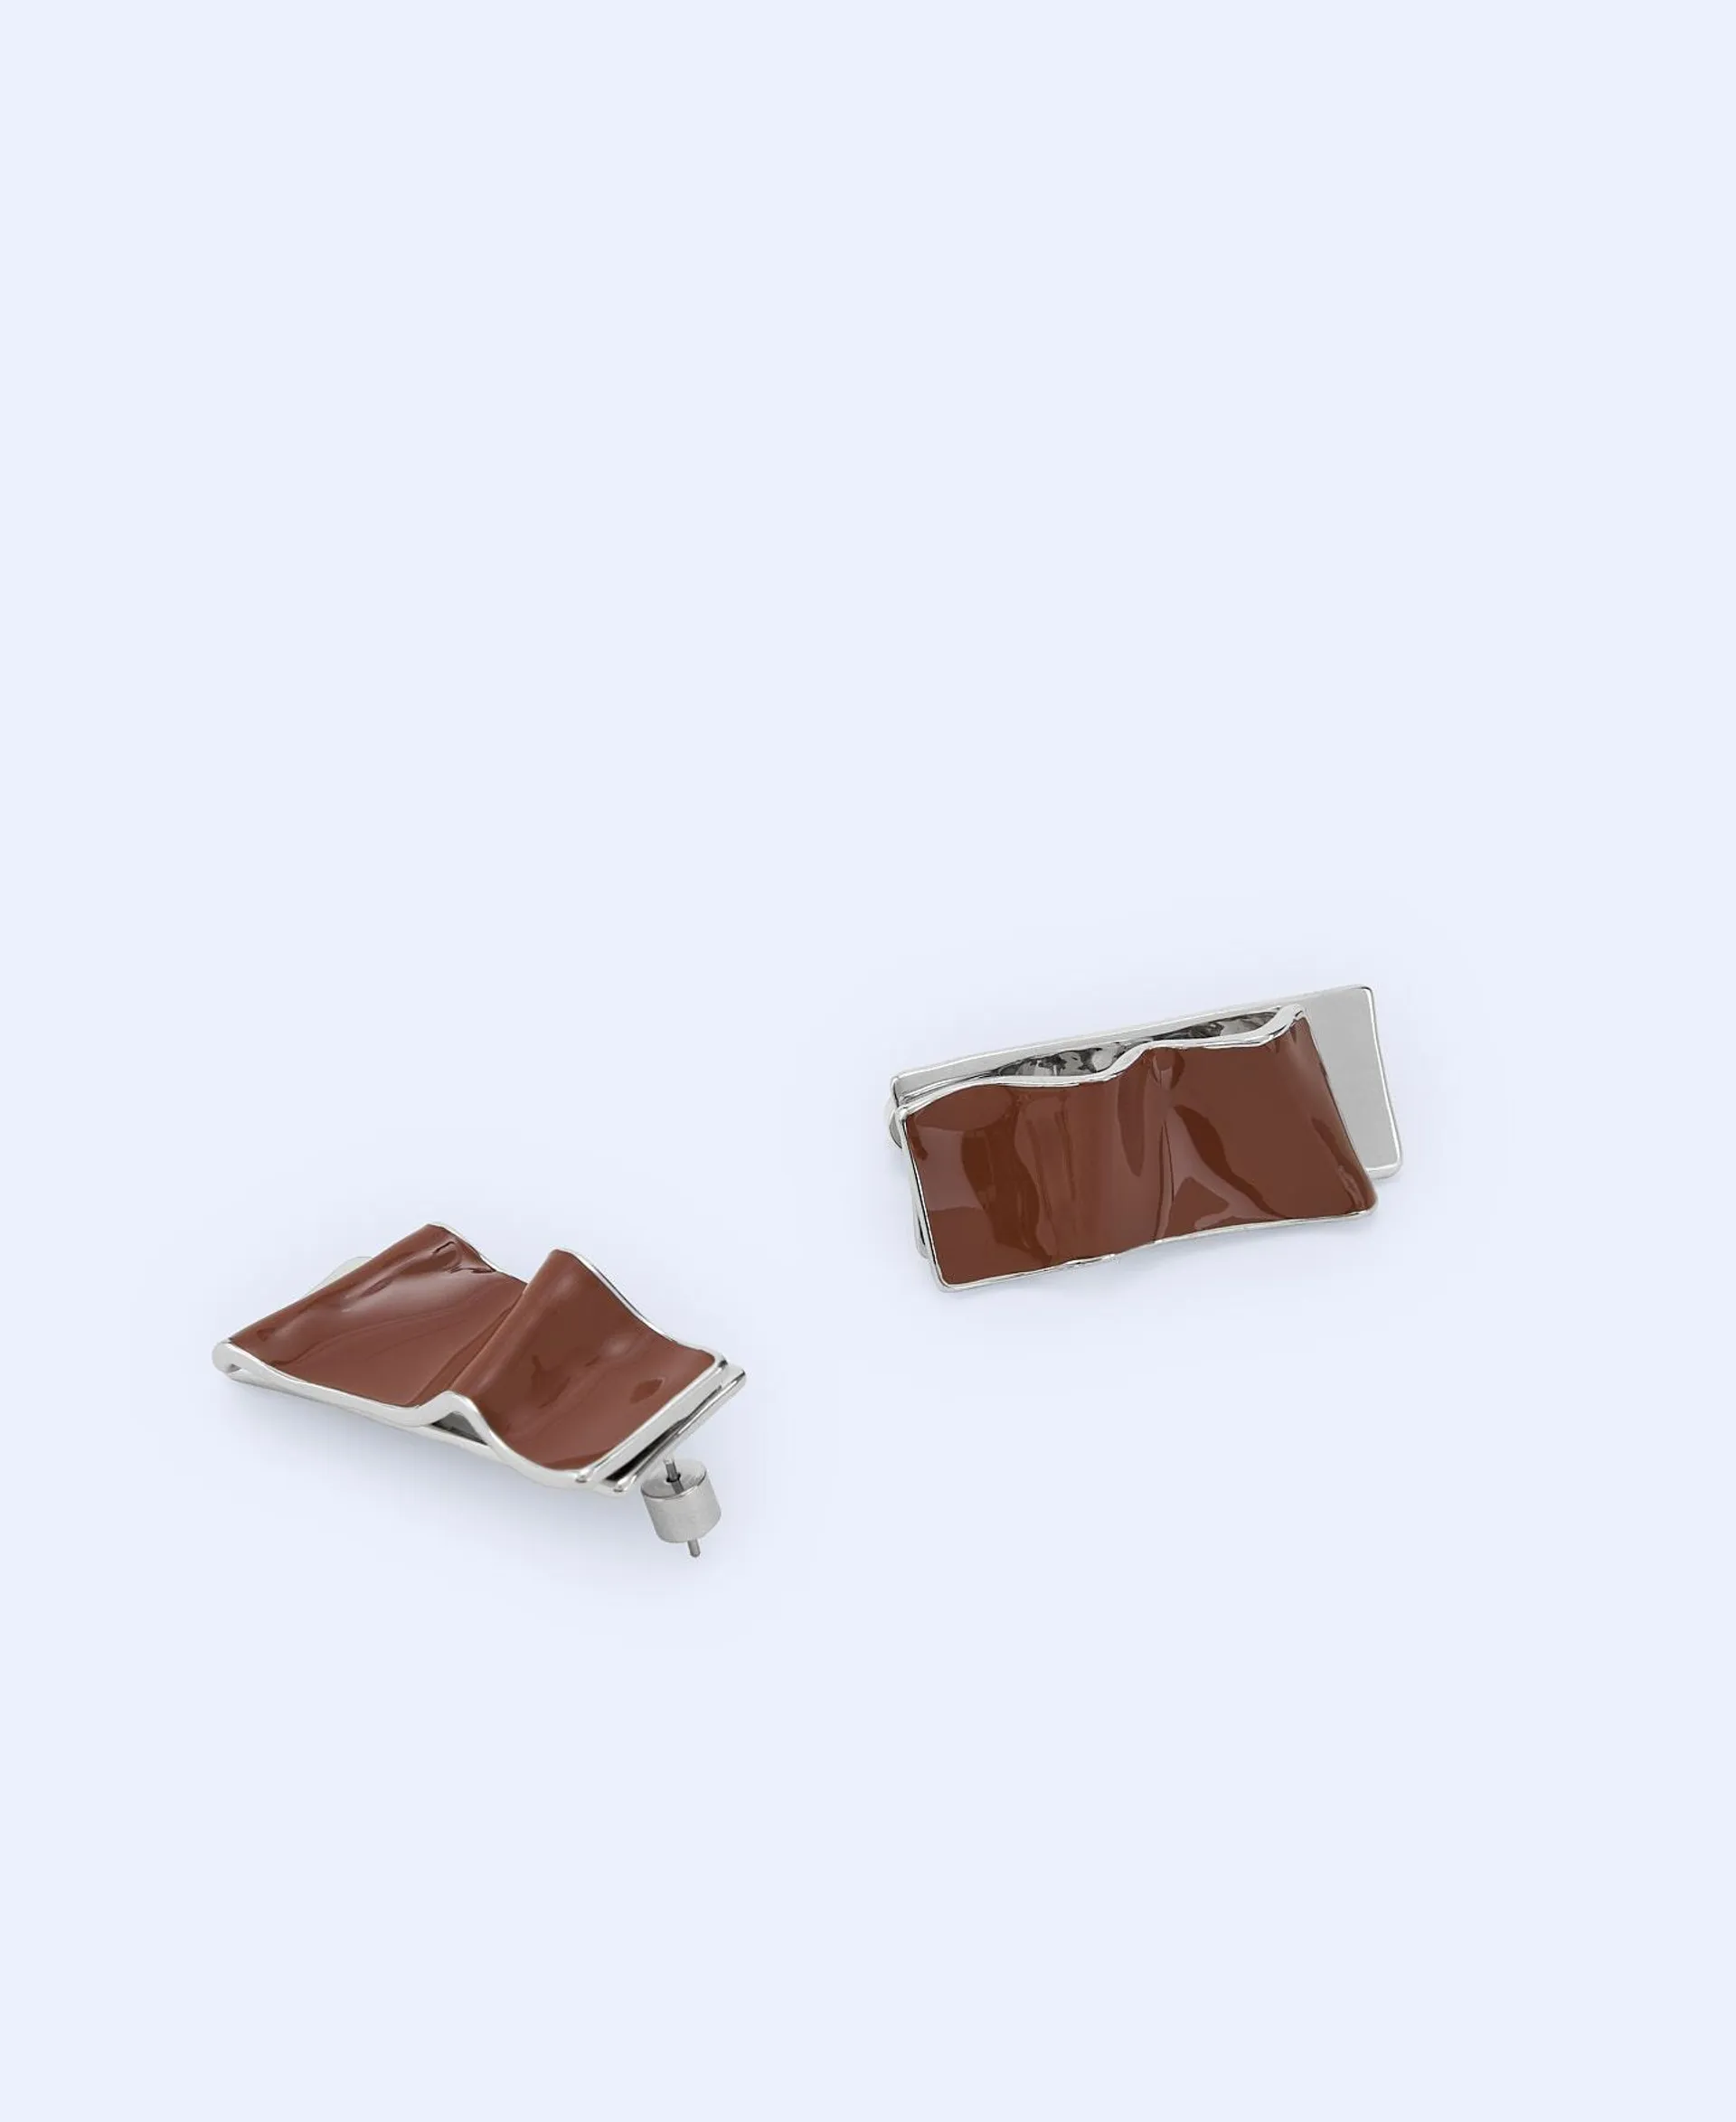 Lacquered Pliegue motif earring